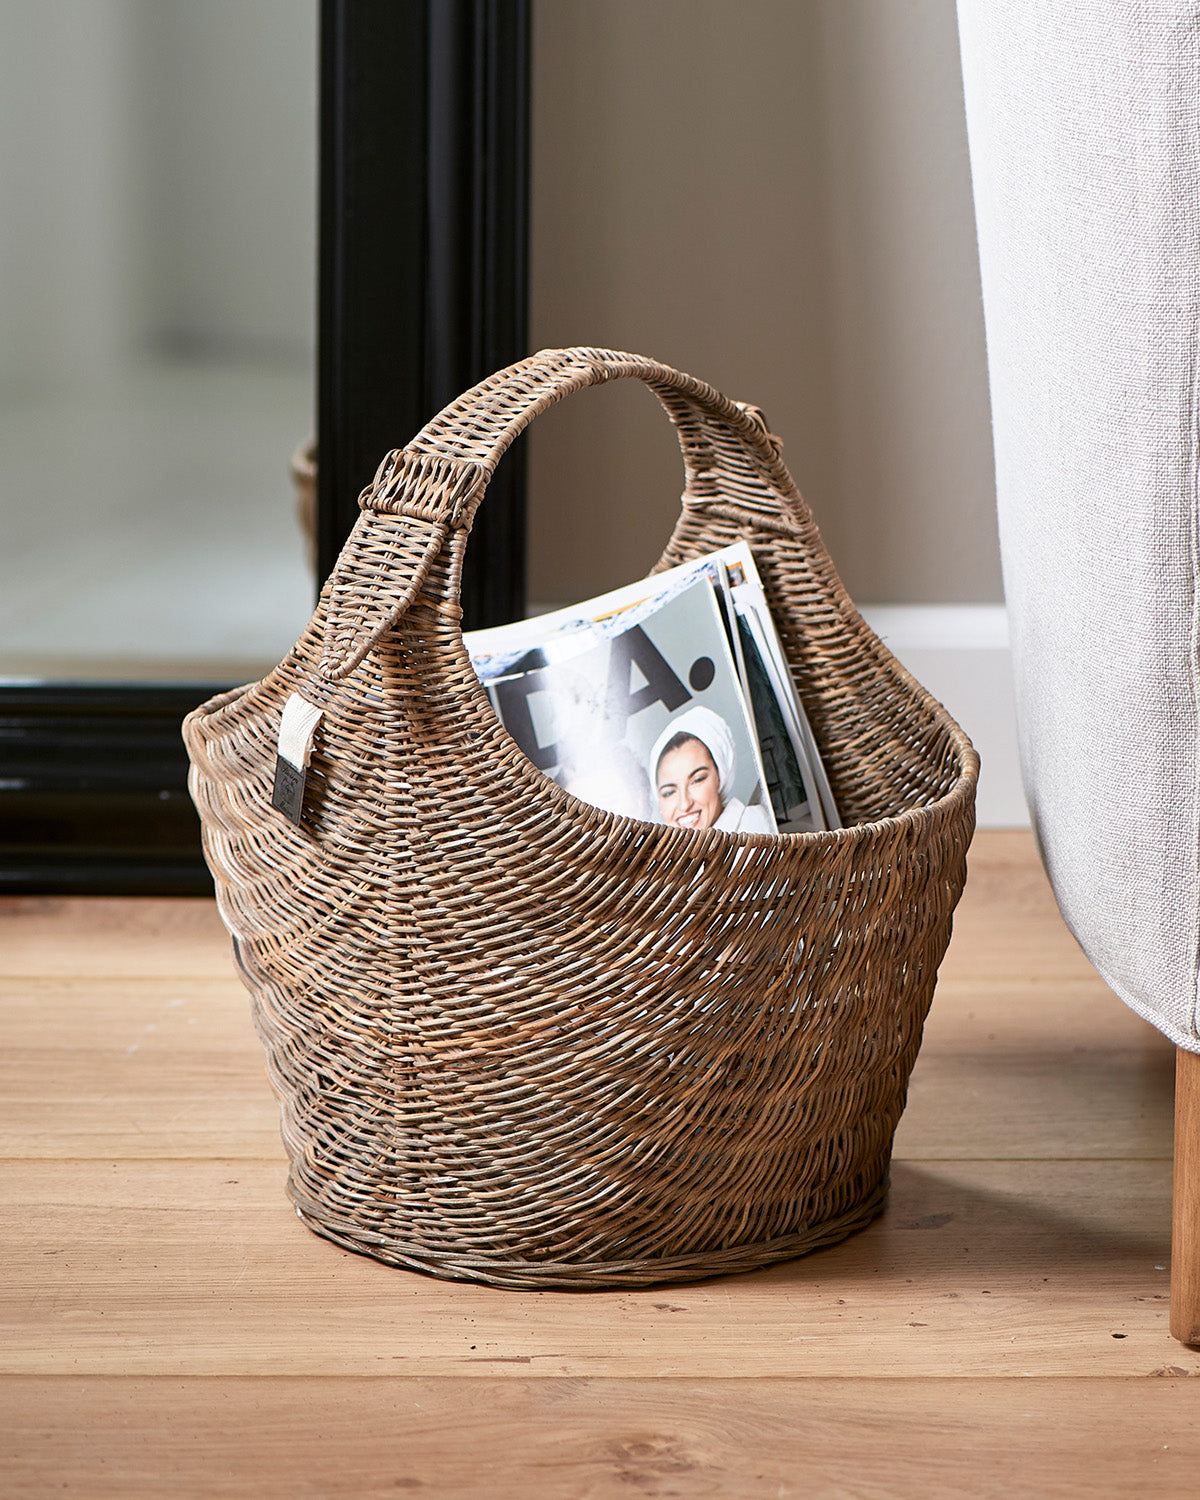 MAGAZINE BASKET made of rattan in the shape of a bag by Riviera Maison